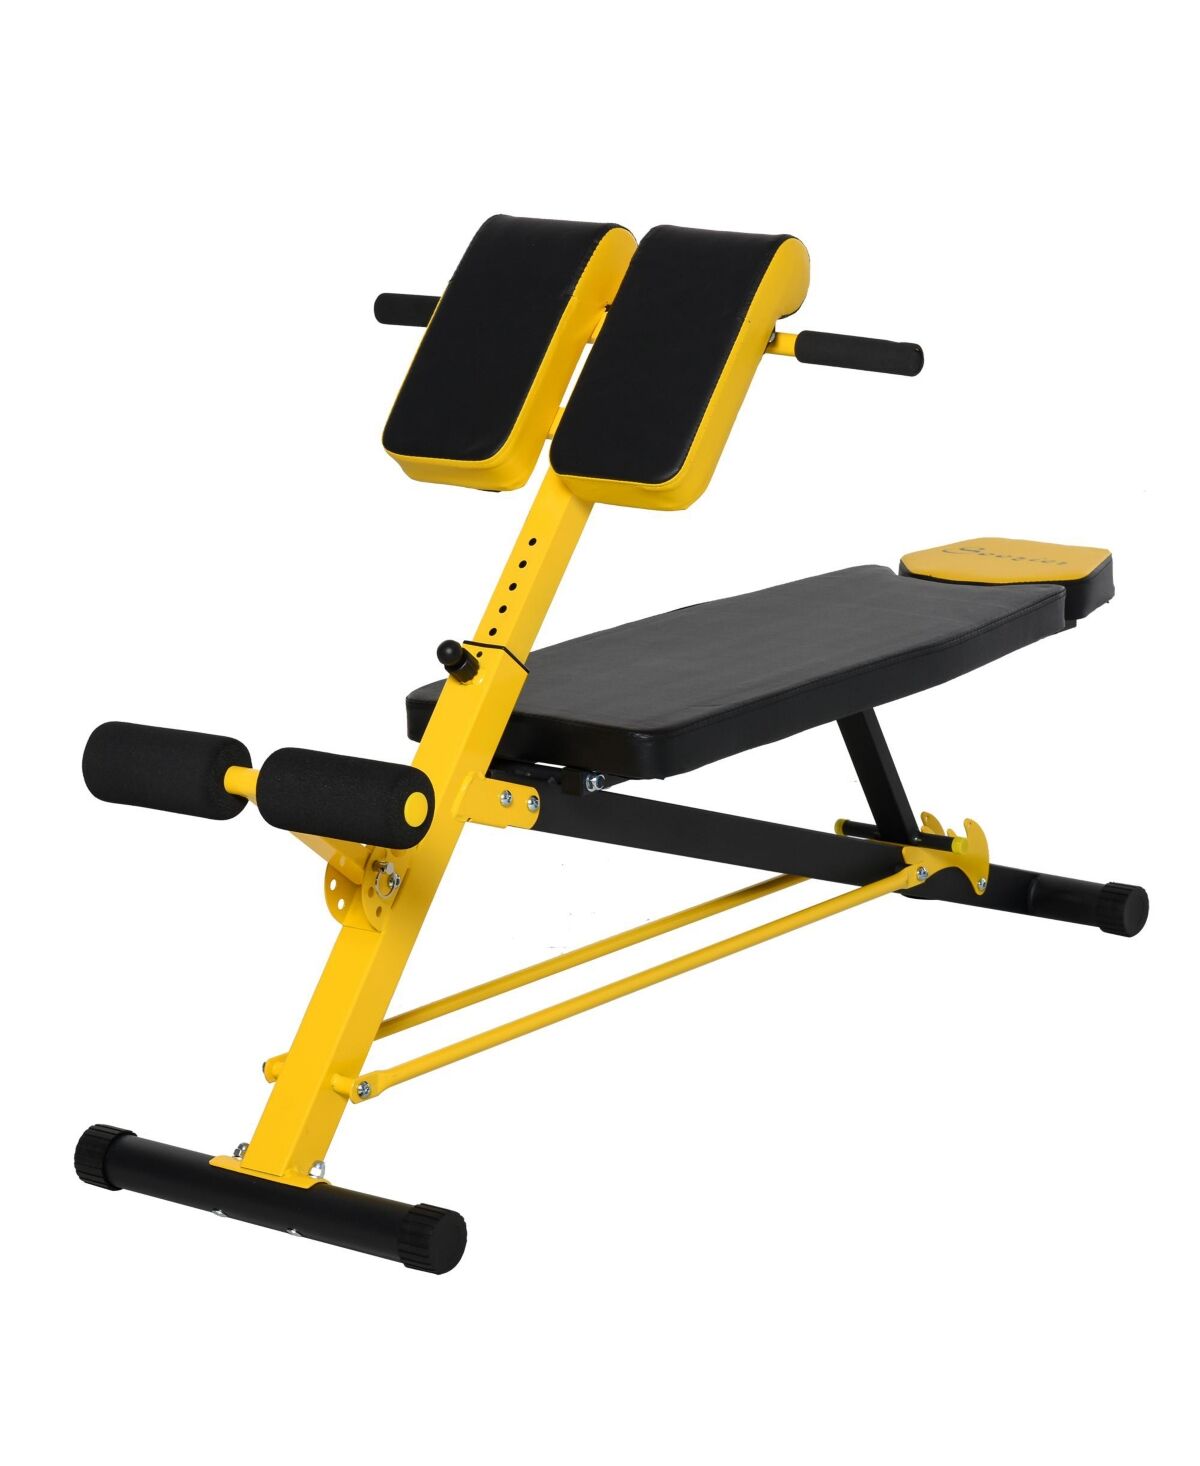 Soozier Adjustable Hyper Extension Dumbbell Weight Bench, Foam Leg Holders, Exercise Abs, Arms, Core, Strength Workout Station for Home Gym, Yellow -